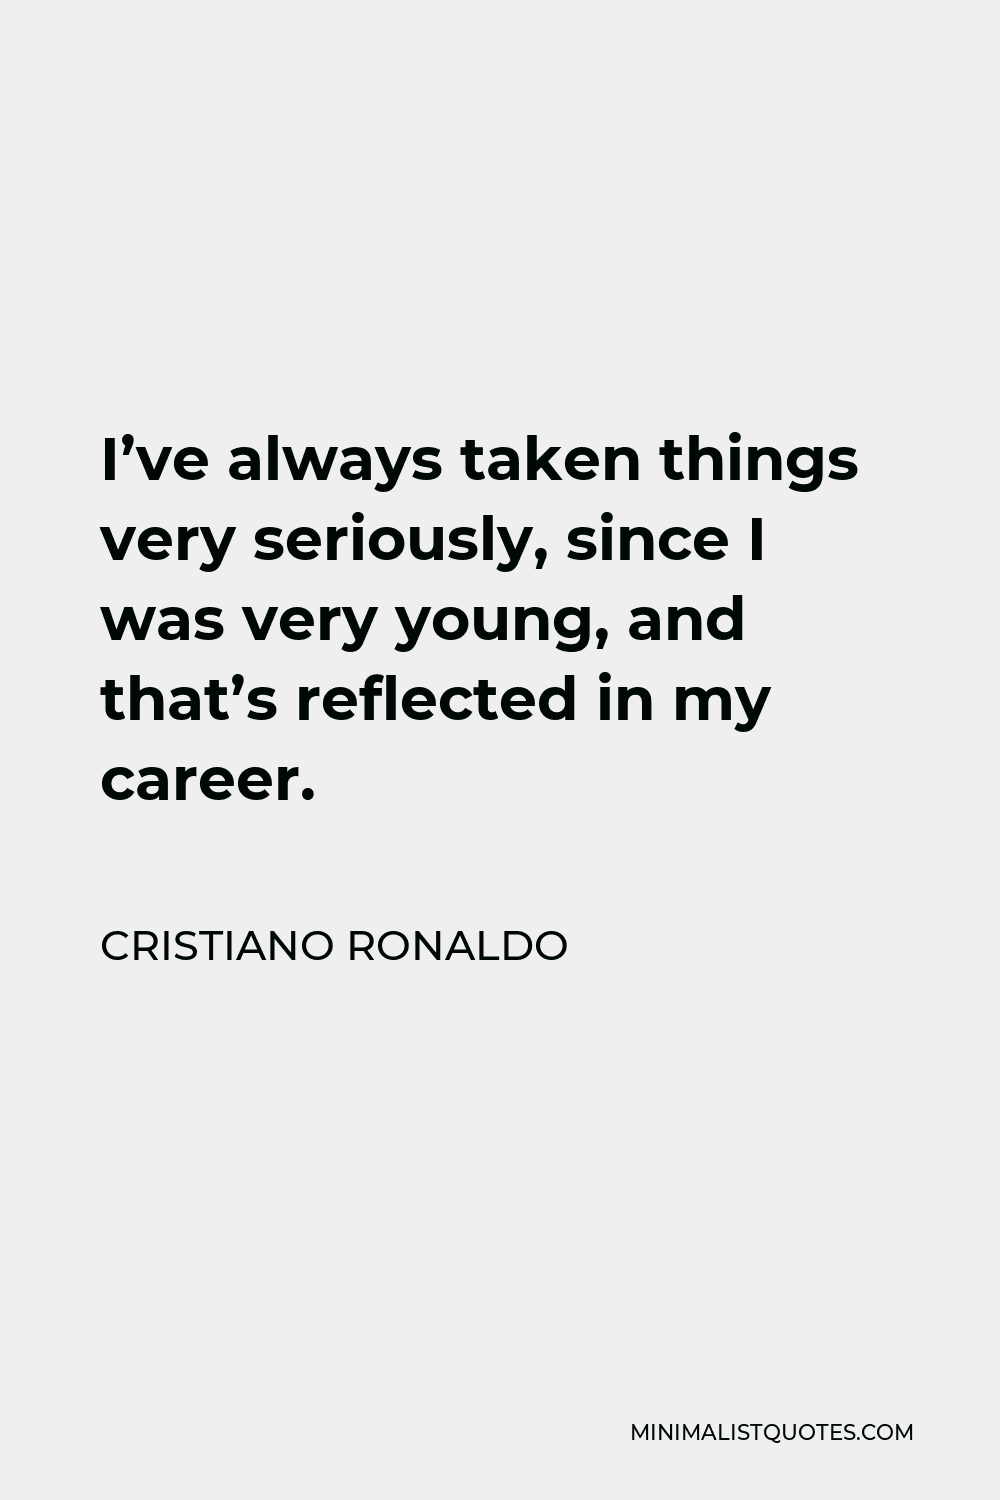 Cristiano Ronaldo Quote - I’ve always taken things very seriously, since I was very young, and that’s reflected in my career.